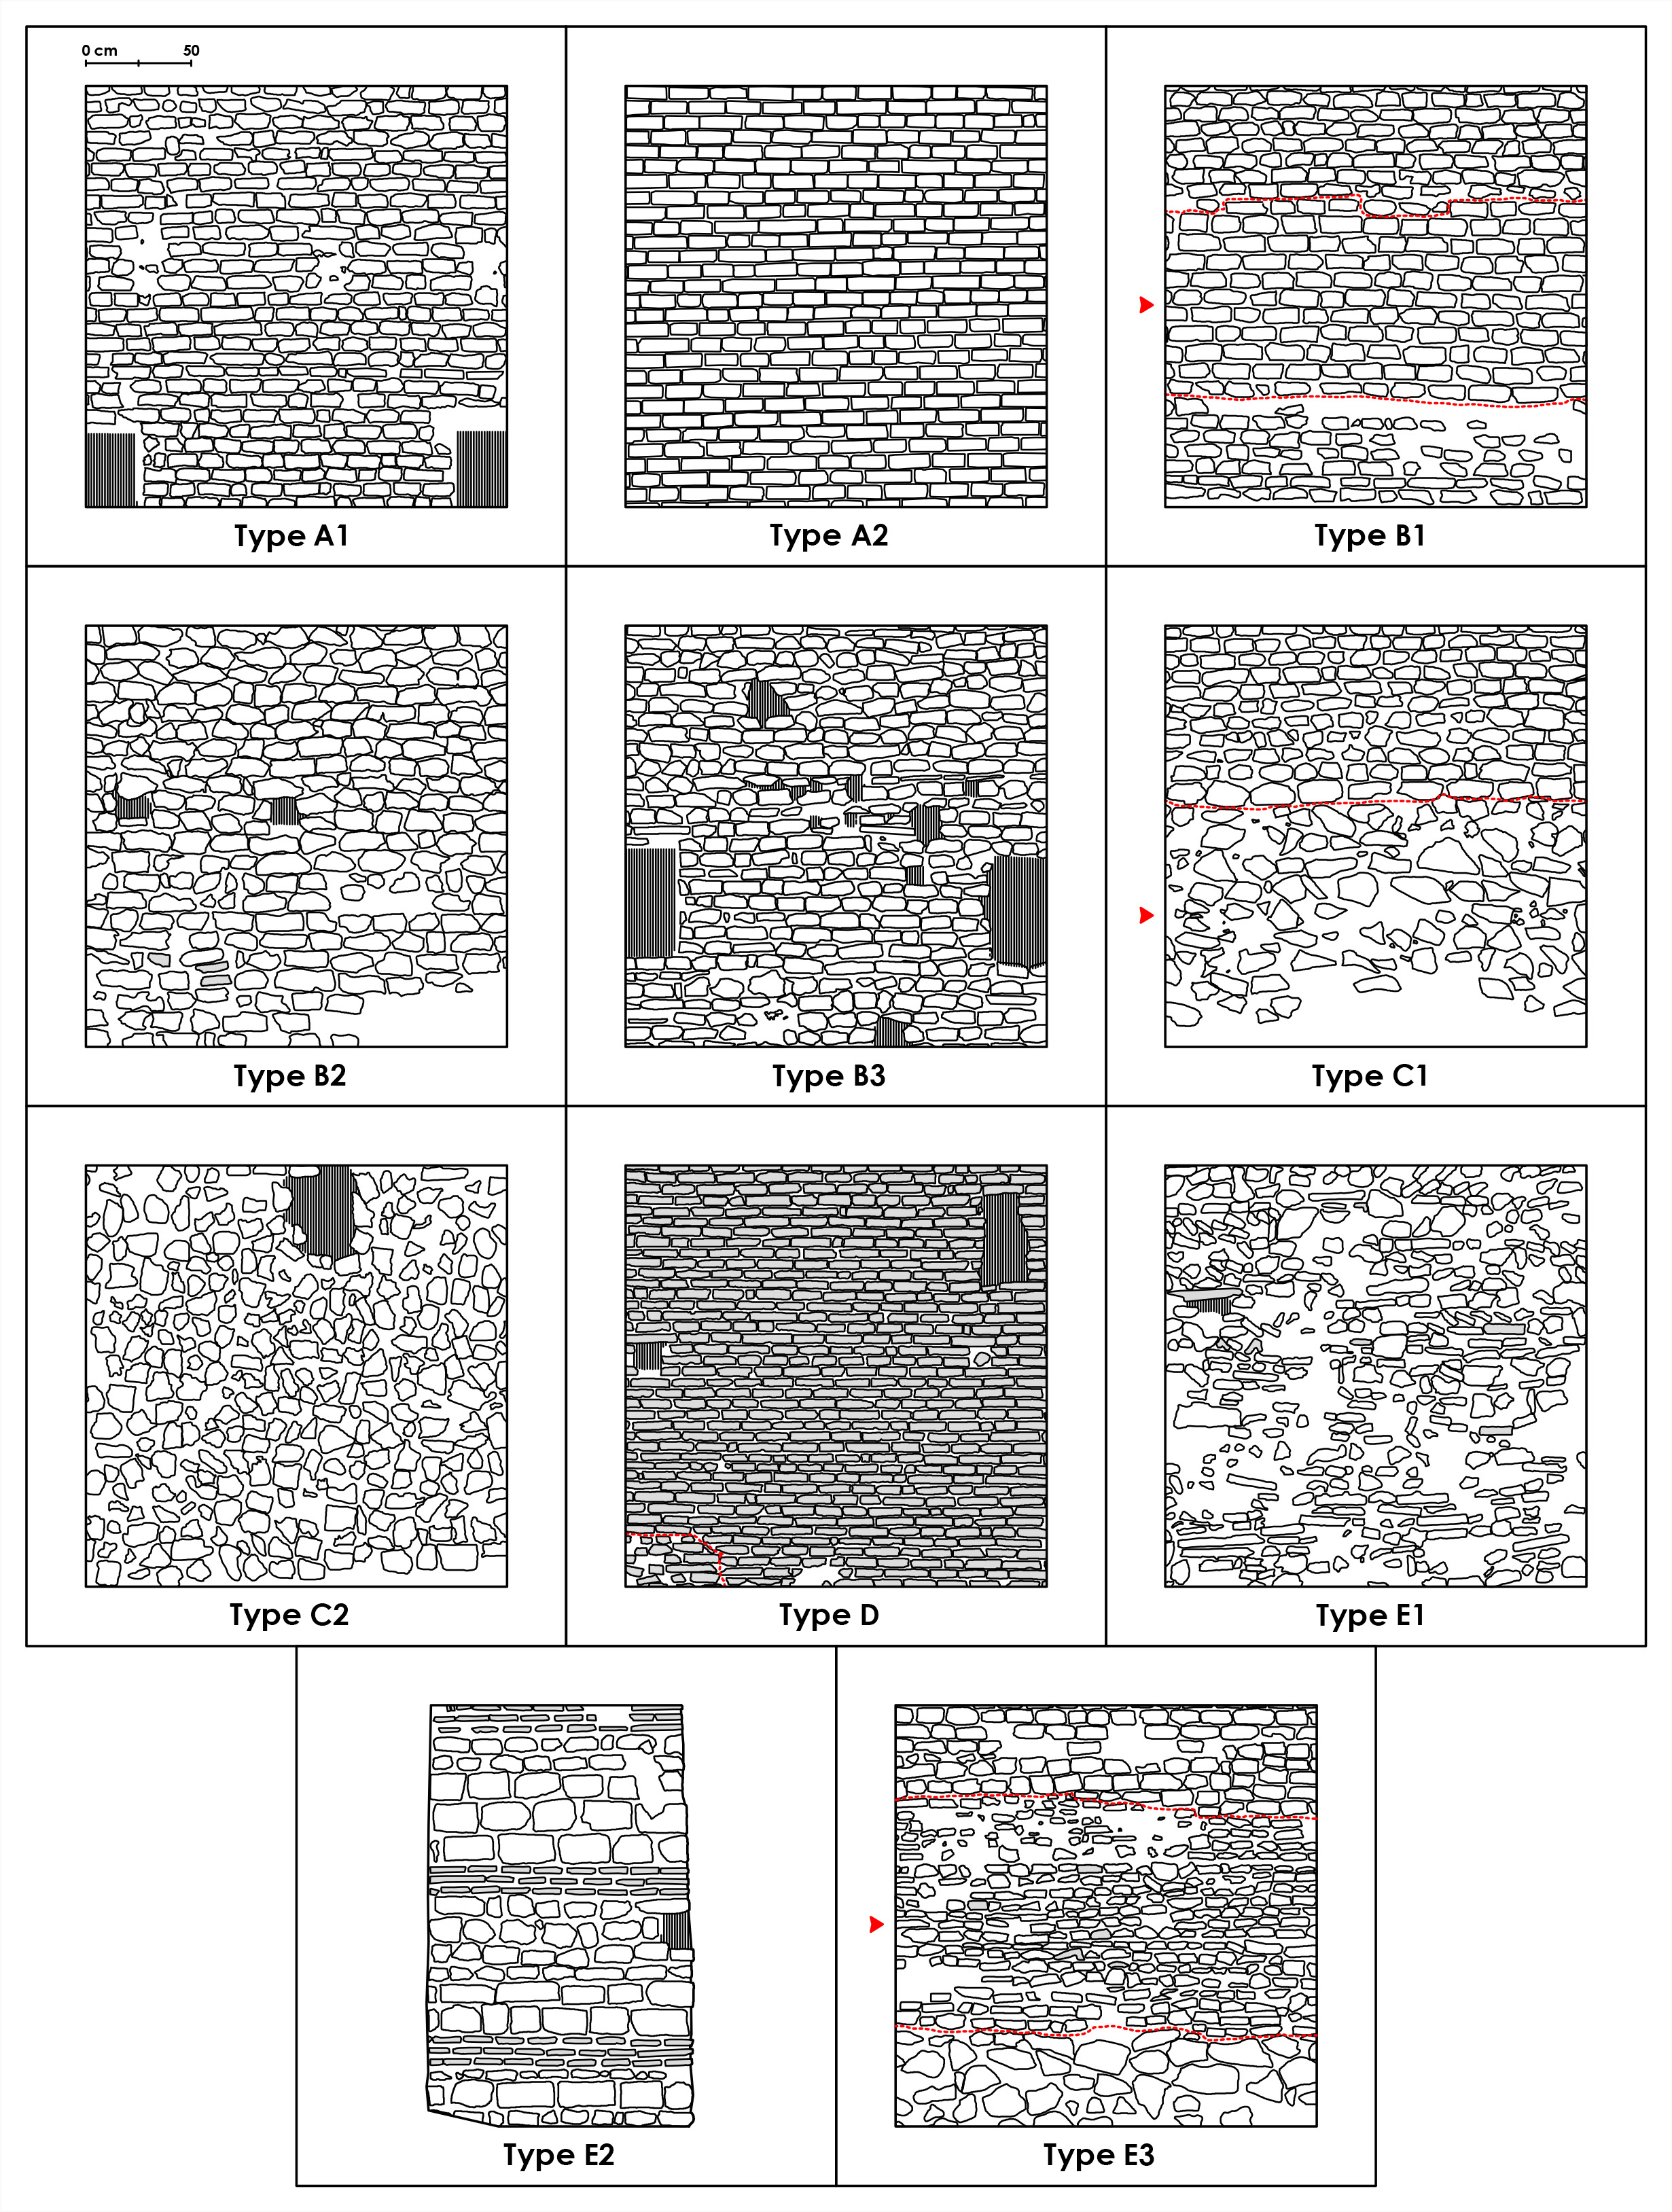  Figure 12. Chrono-typological repertoire of masonry techniques. The earliest typologies are the indicated by the following codes: B2 (Phase 1, first half of the 13th century); A1 (Phase 2, second half of the 13th century), B3 (Phase 4, second half of the 14th century), D (Phase 5, 15th century). 